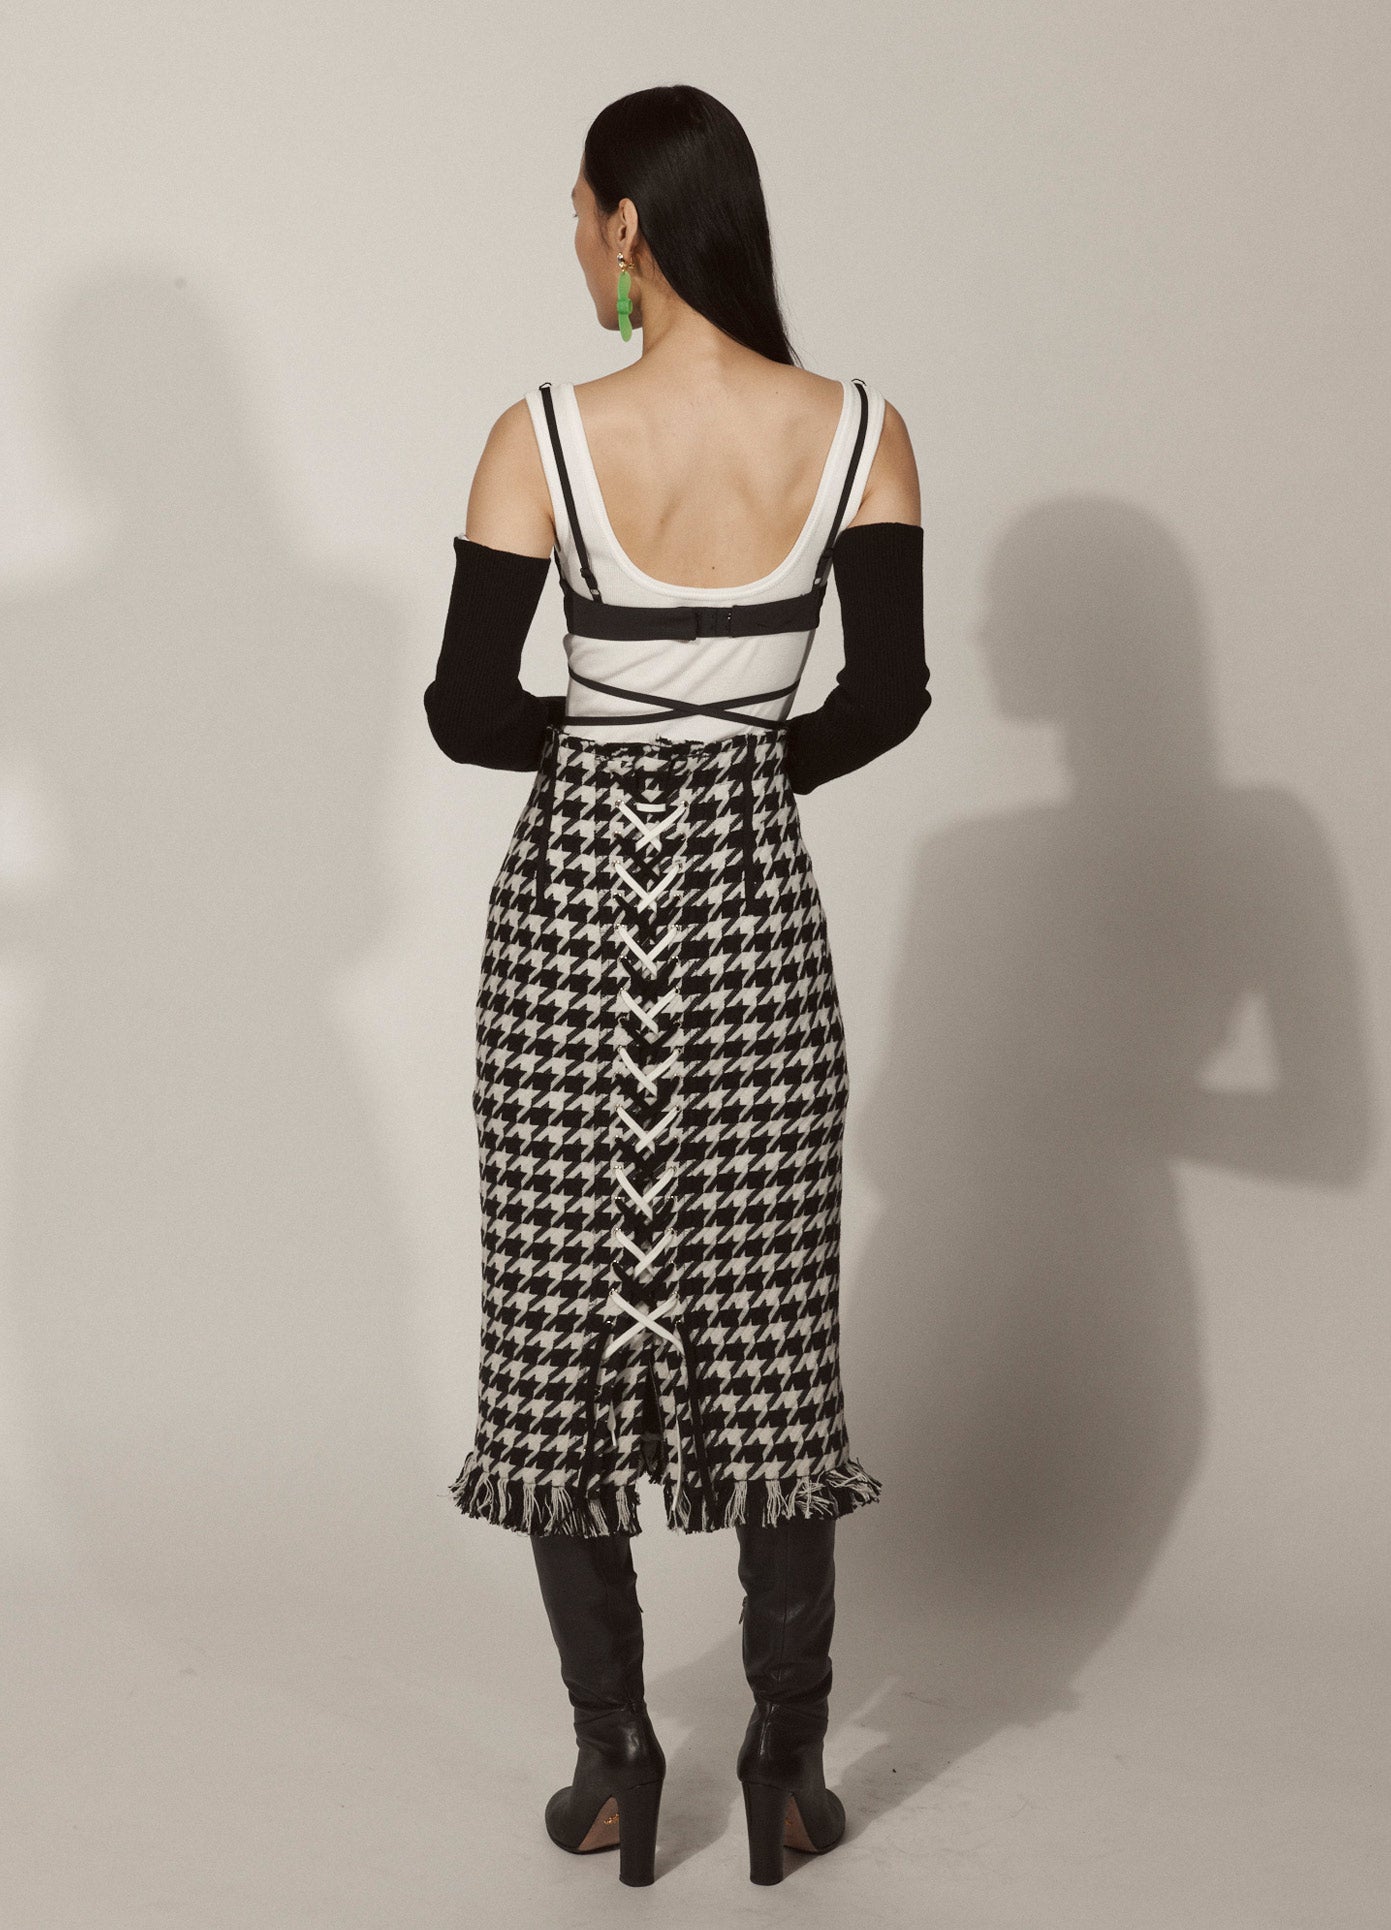 MONSE Tweed Lace Up Skirt in Black and Ivory on Model Lookbook Full Back View